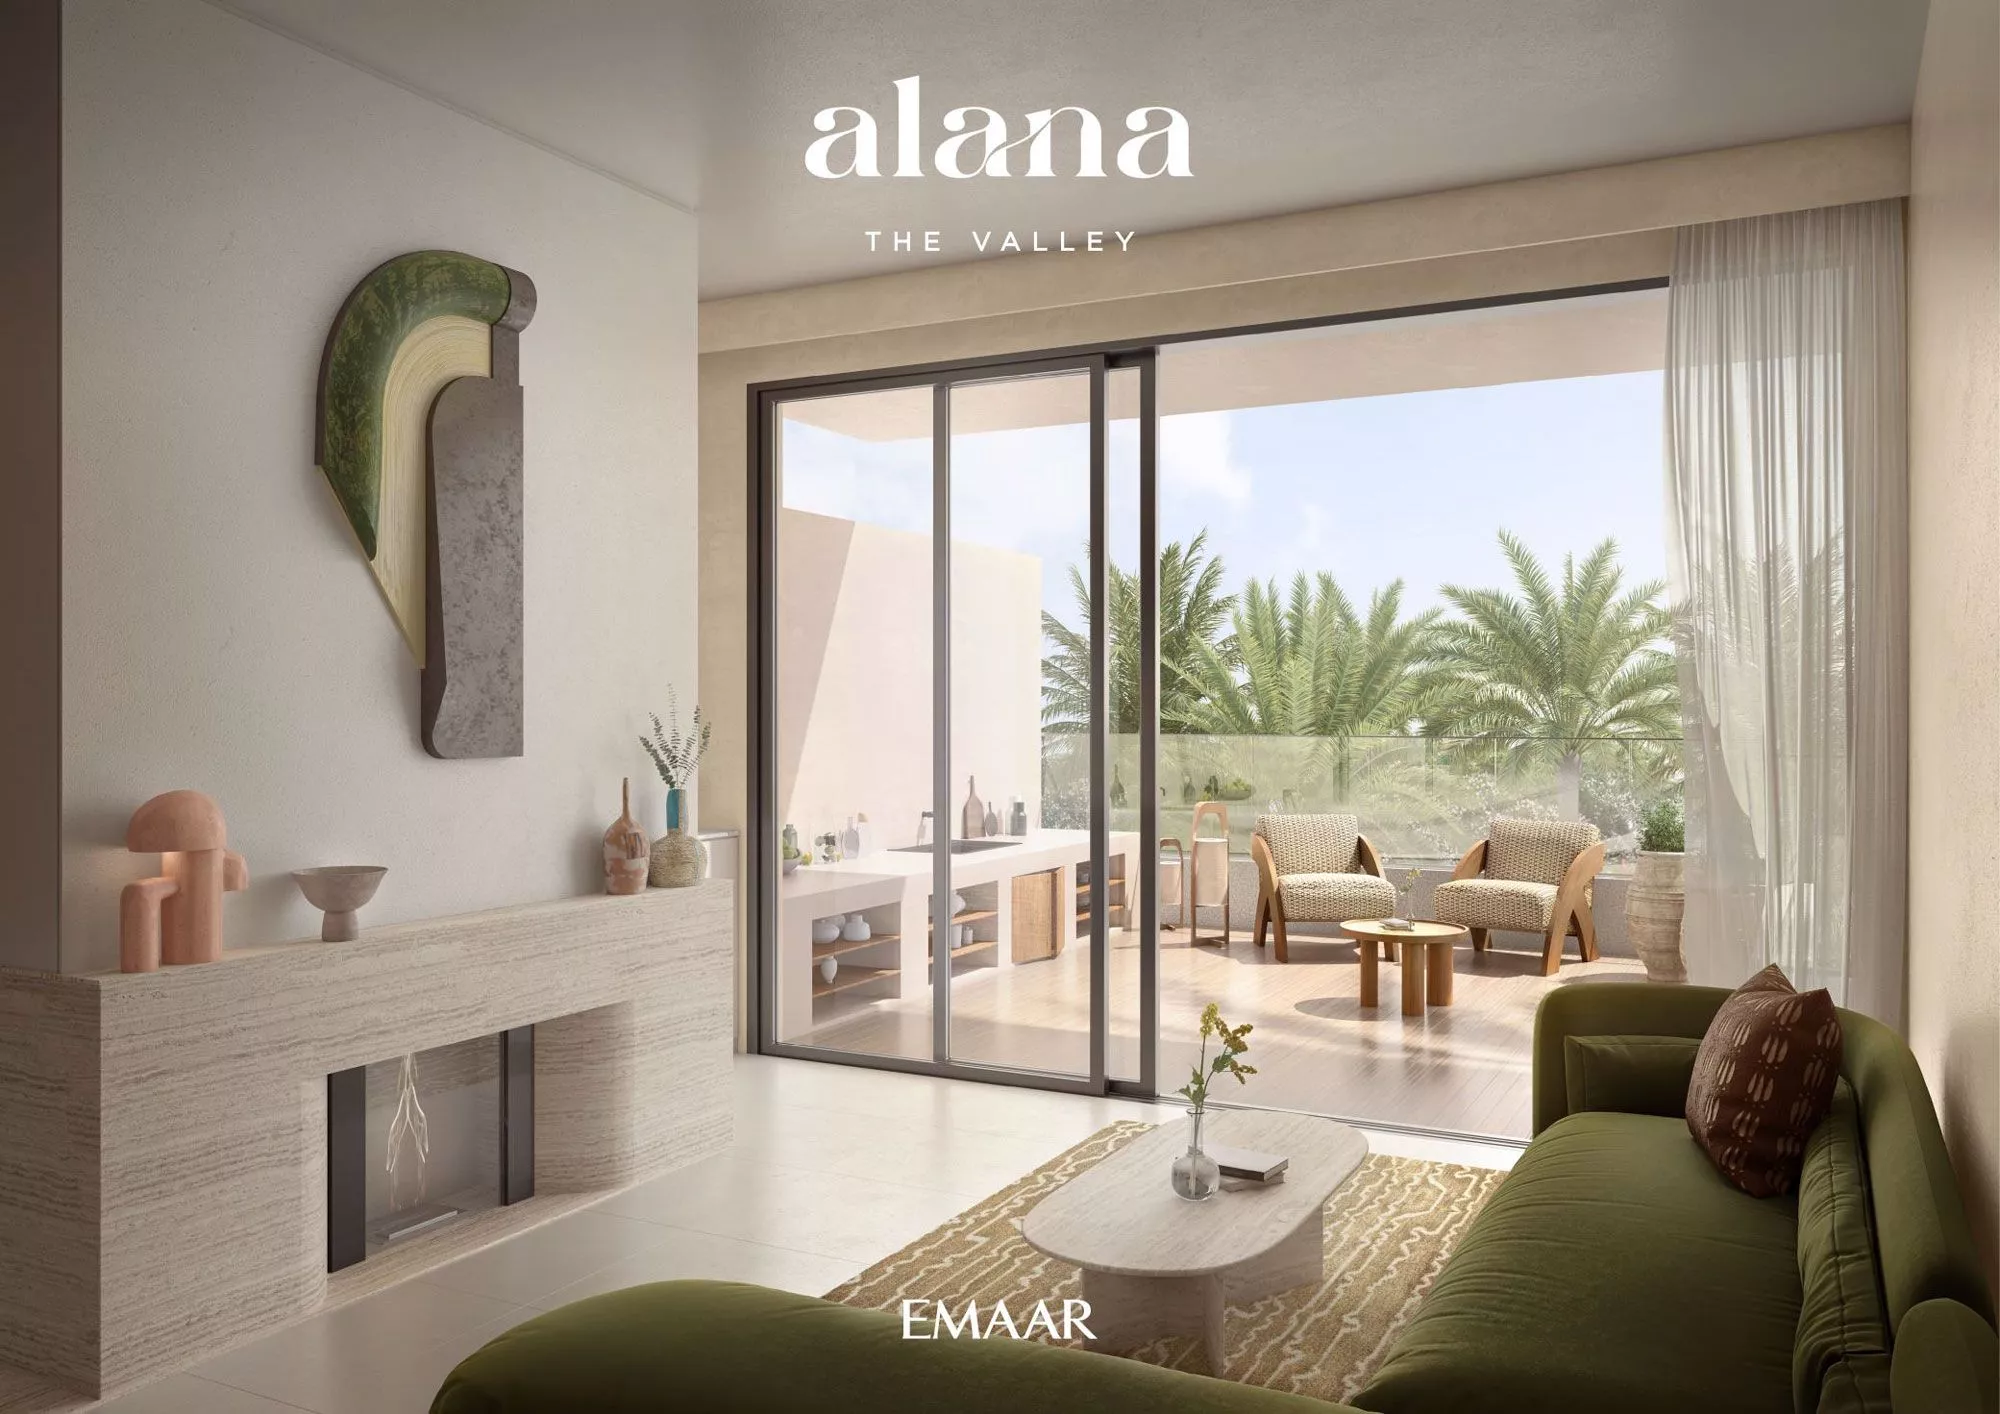 Alana in The Valley 3-5 BR Twin Villas for Sale.